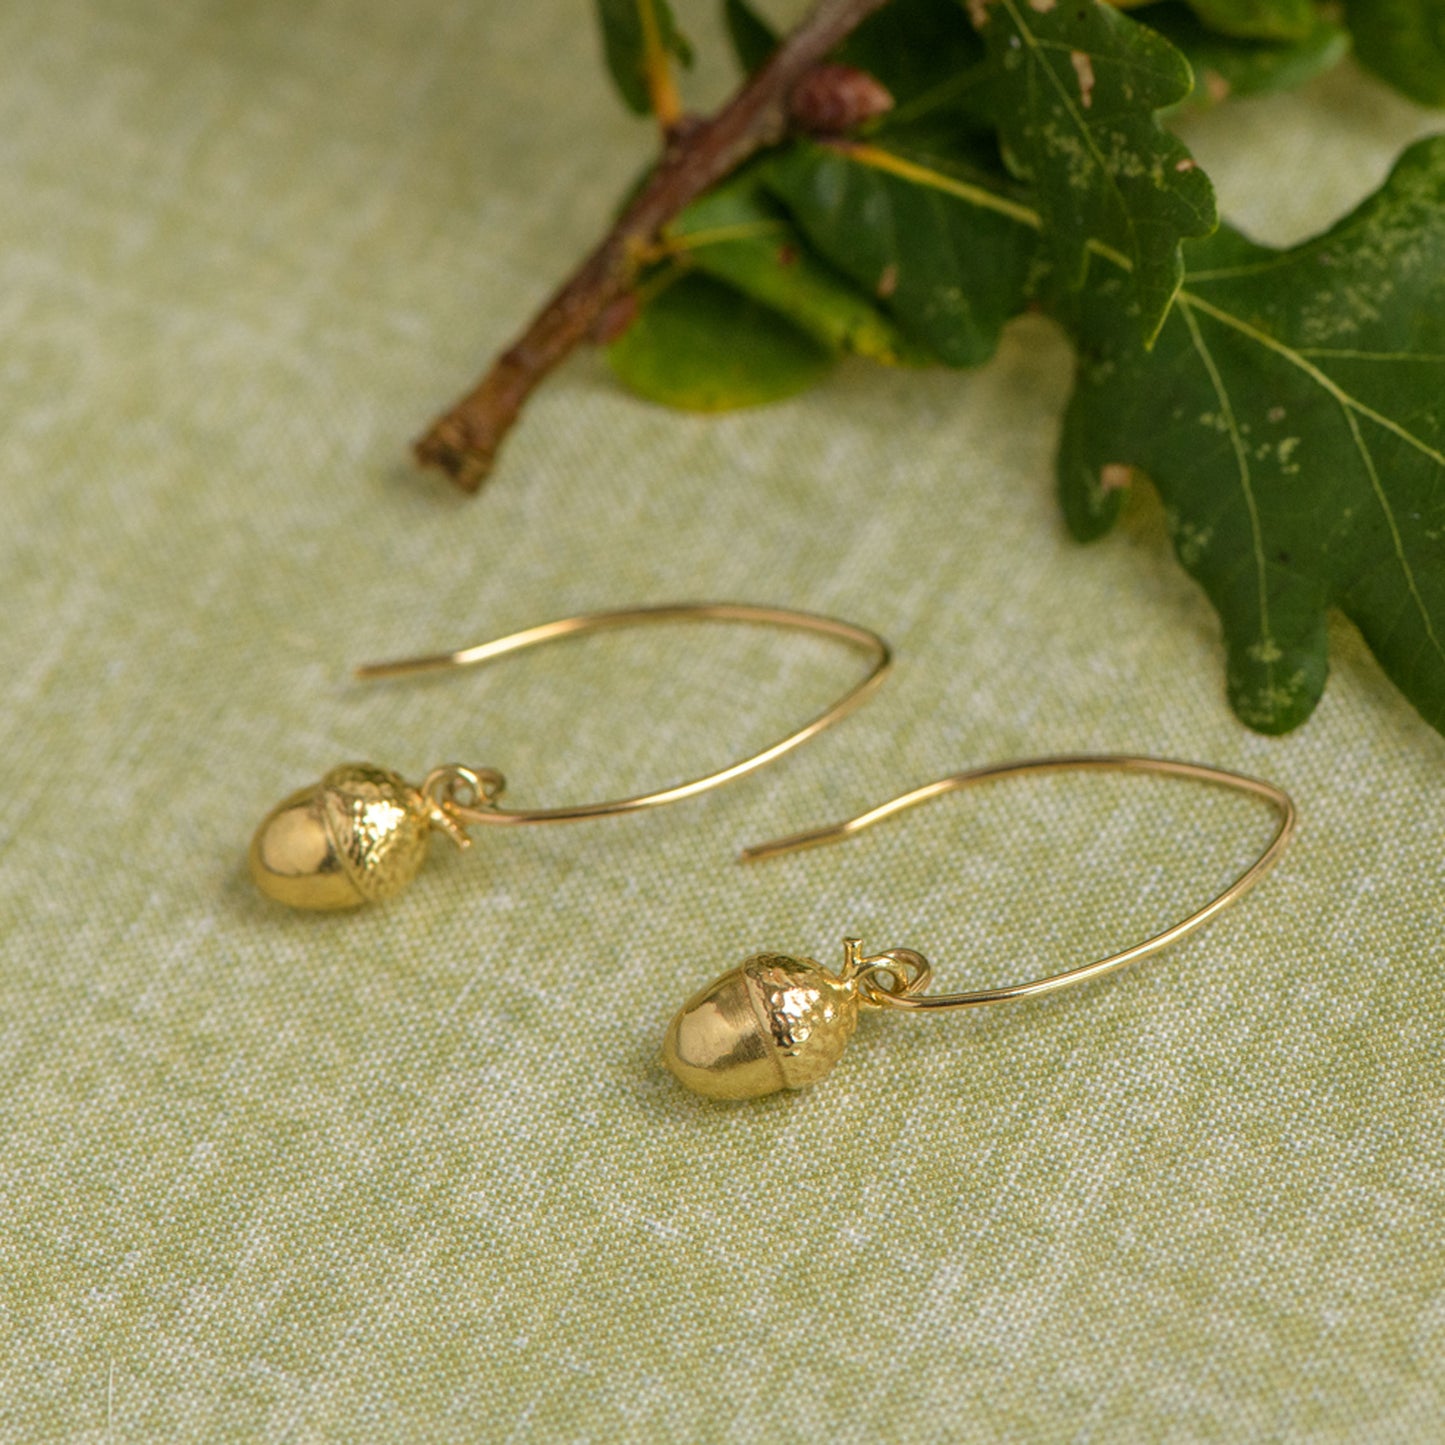 9ct yellow gold acorn earrings by Notion Jewellery